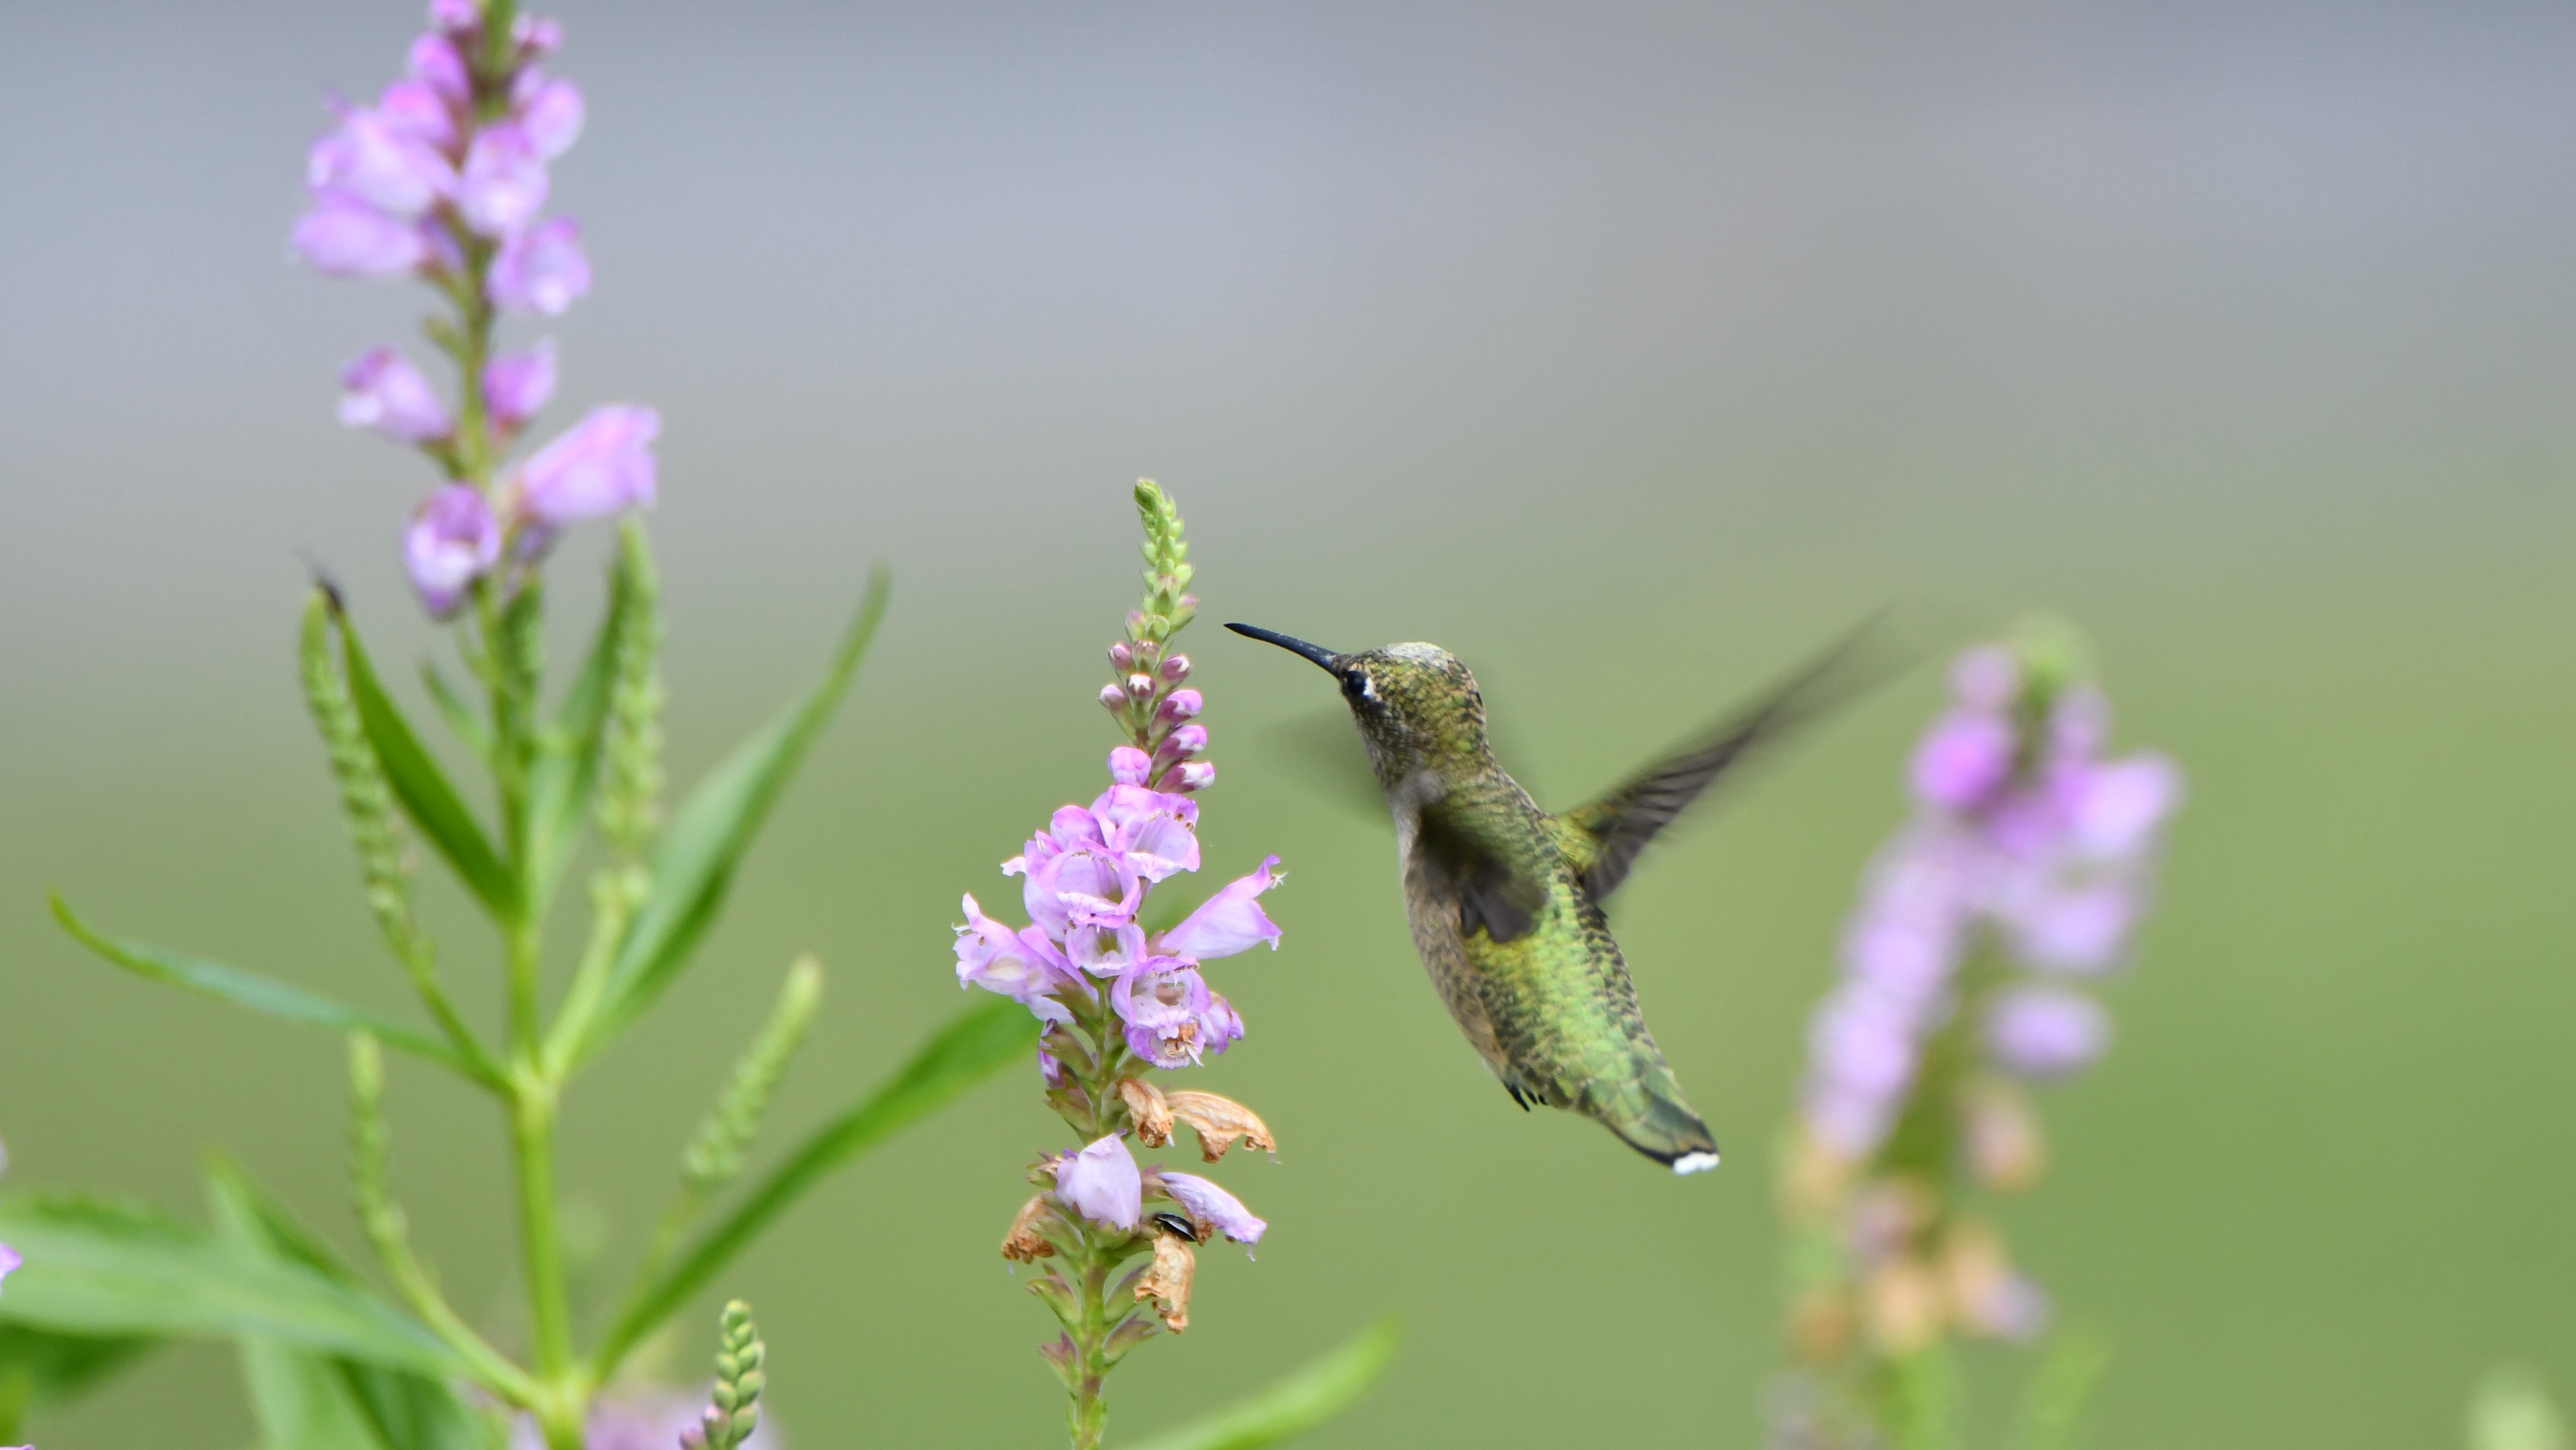 A hummingbird sipping nectar from flowers.